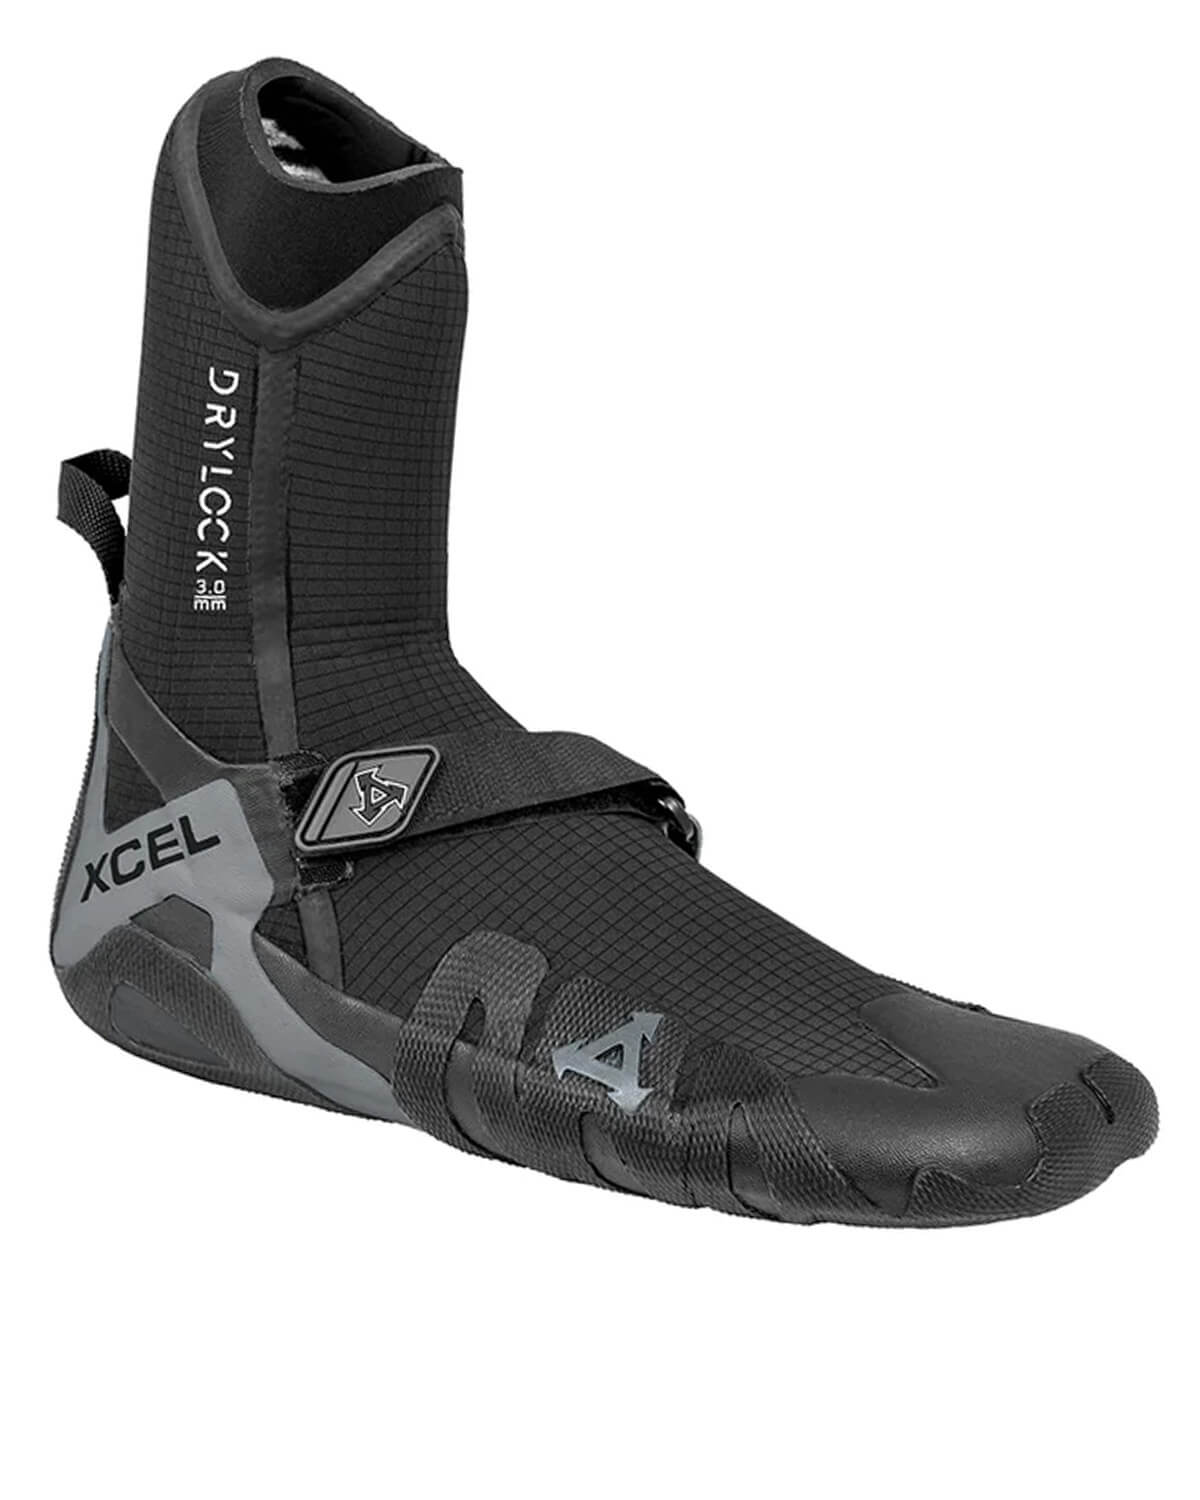 3mm XCEL DRYLOCK Round Toe Wetsuit Boots